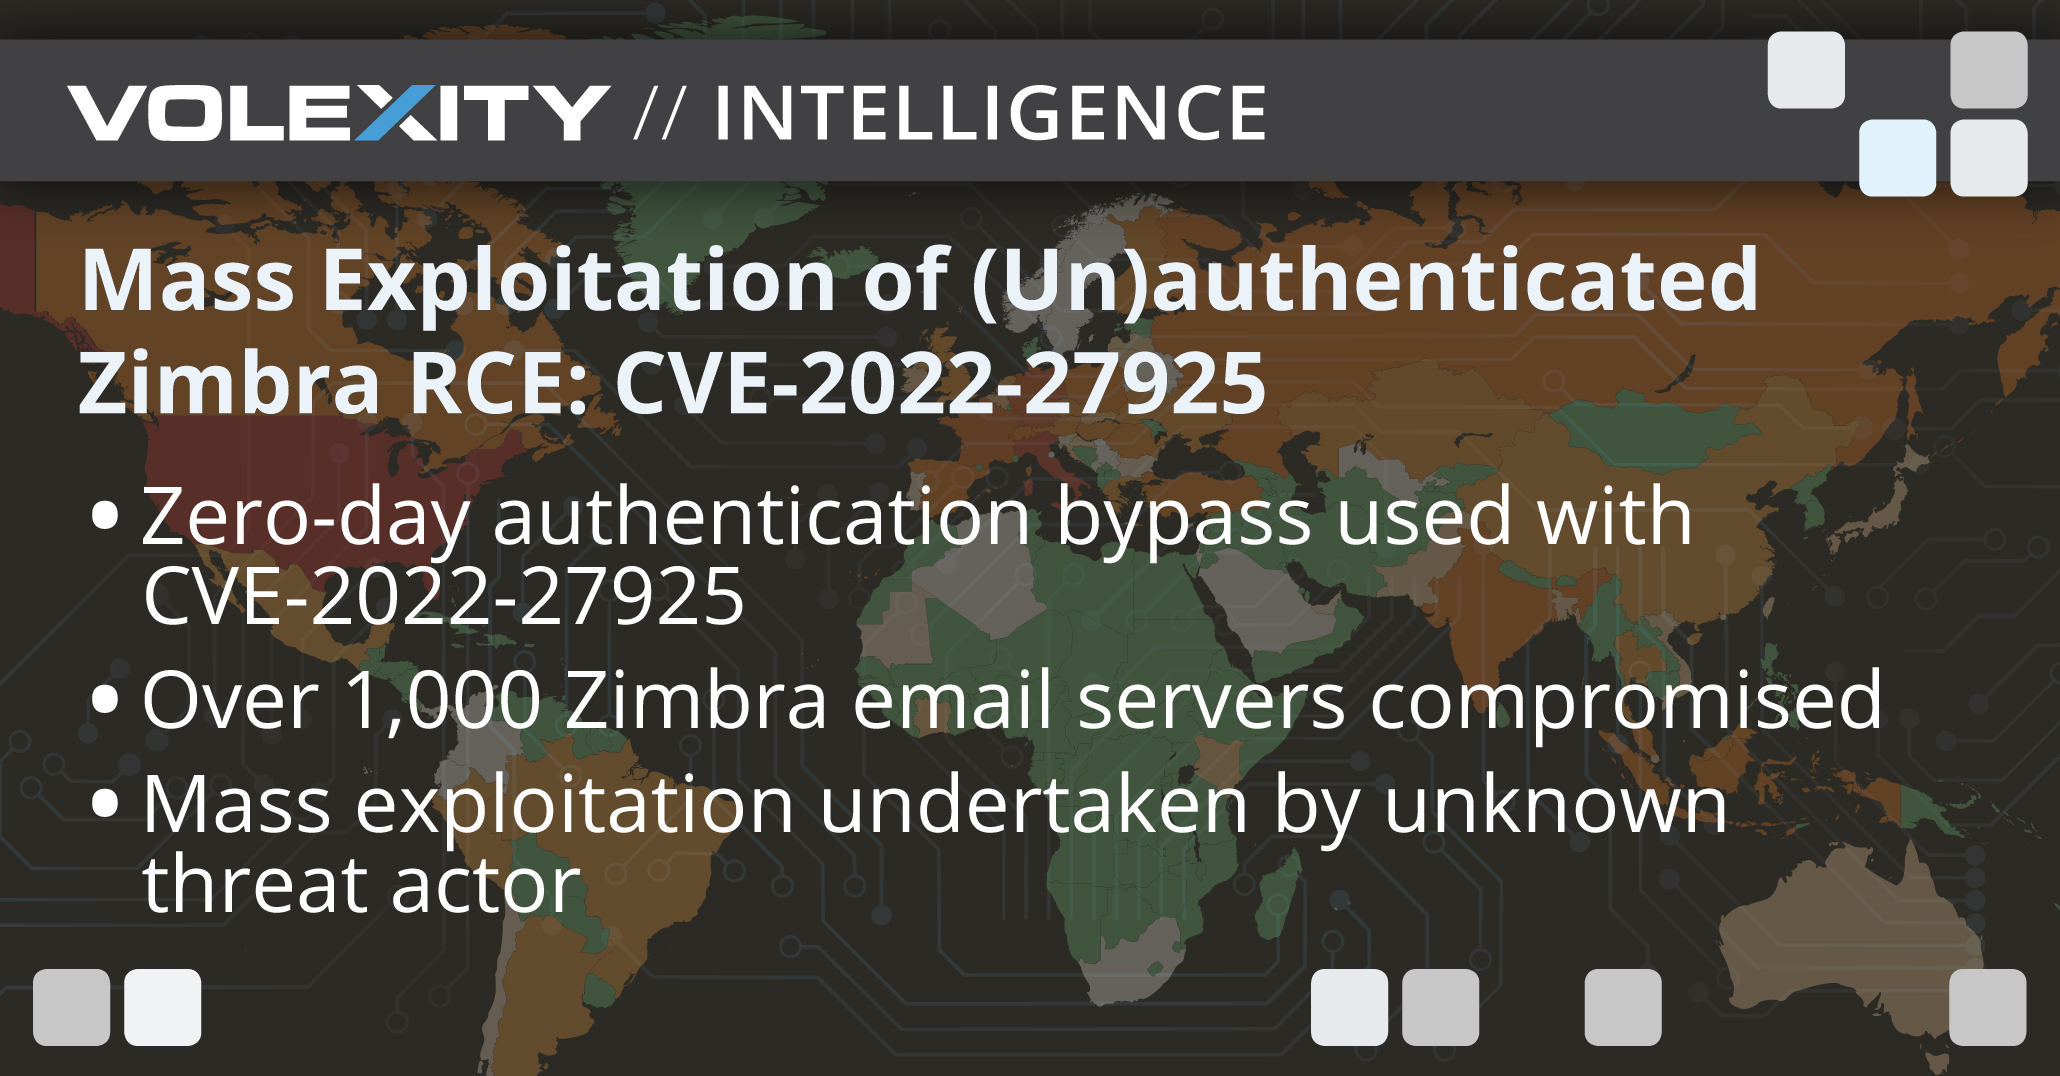 Zimbra Releases Patch for Actively Exploited Vulnerability in its  Collaboration Suite